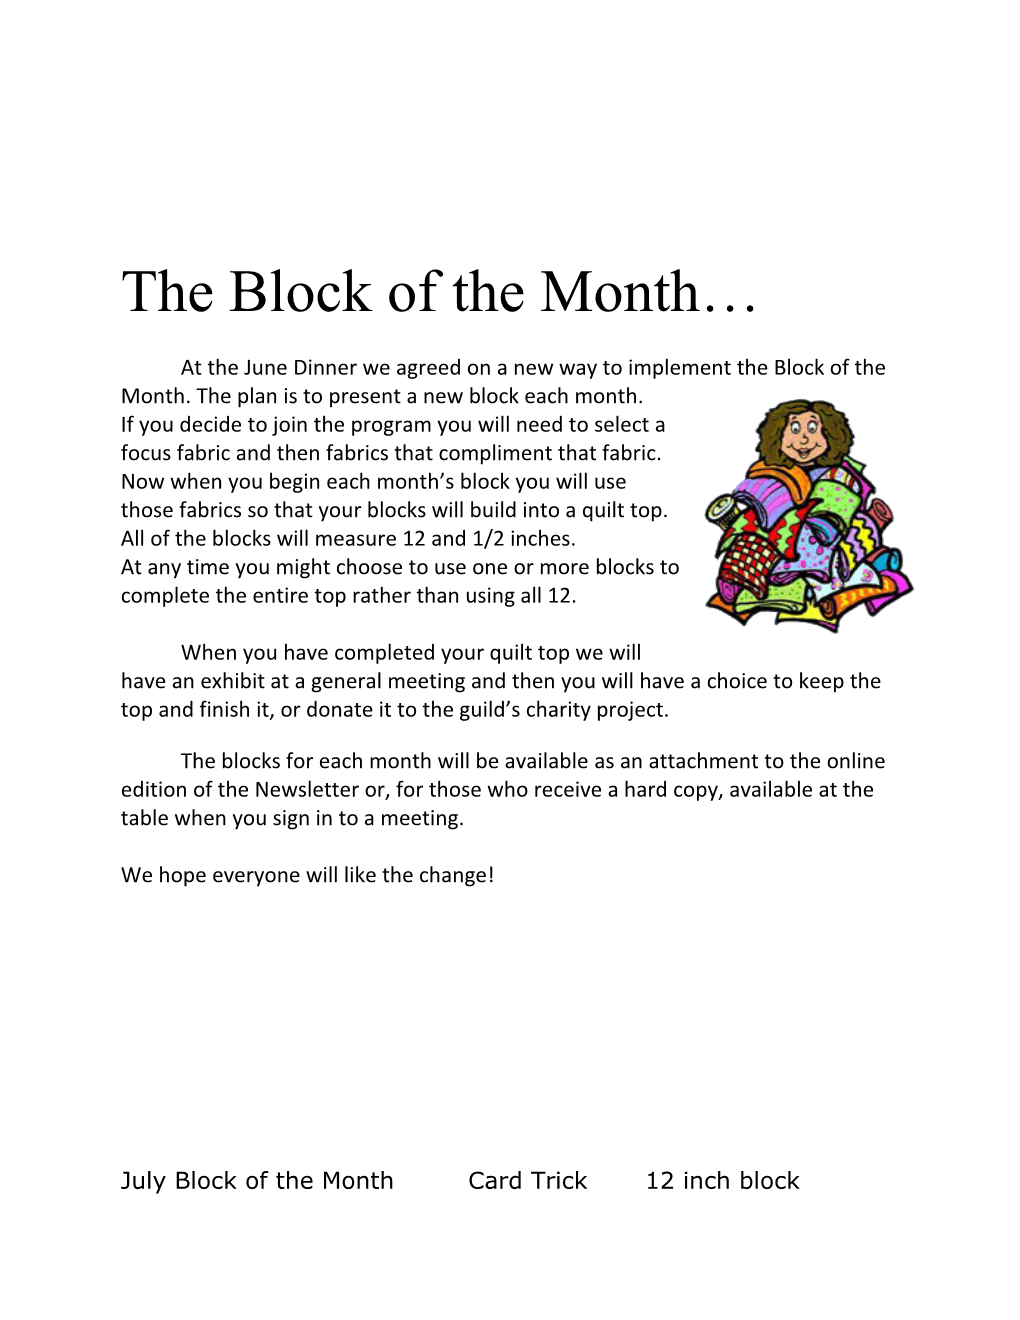 The Block of the Month